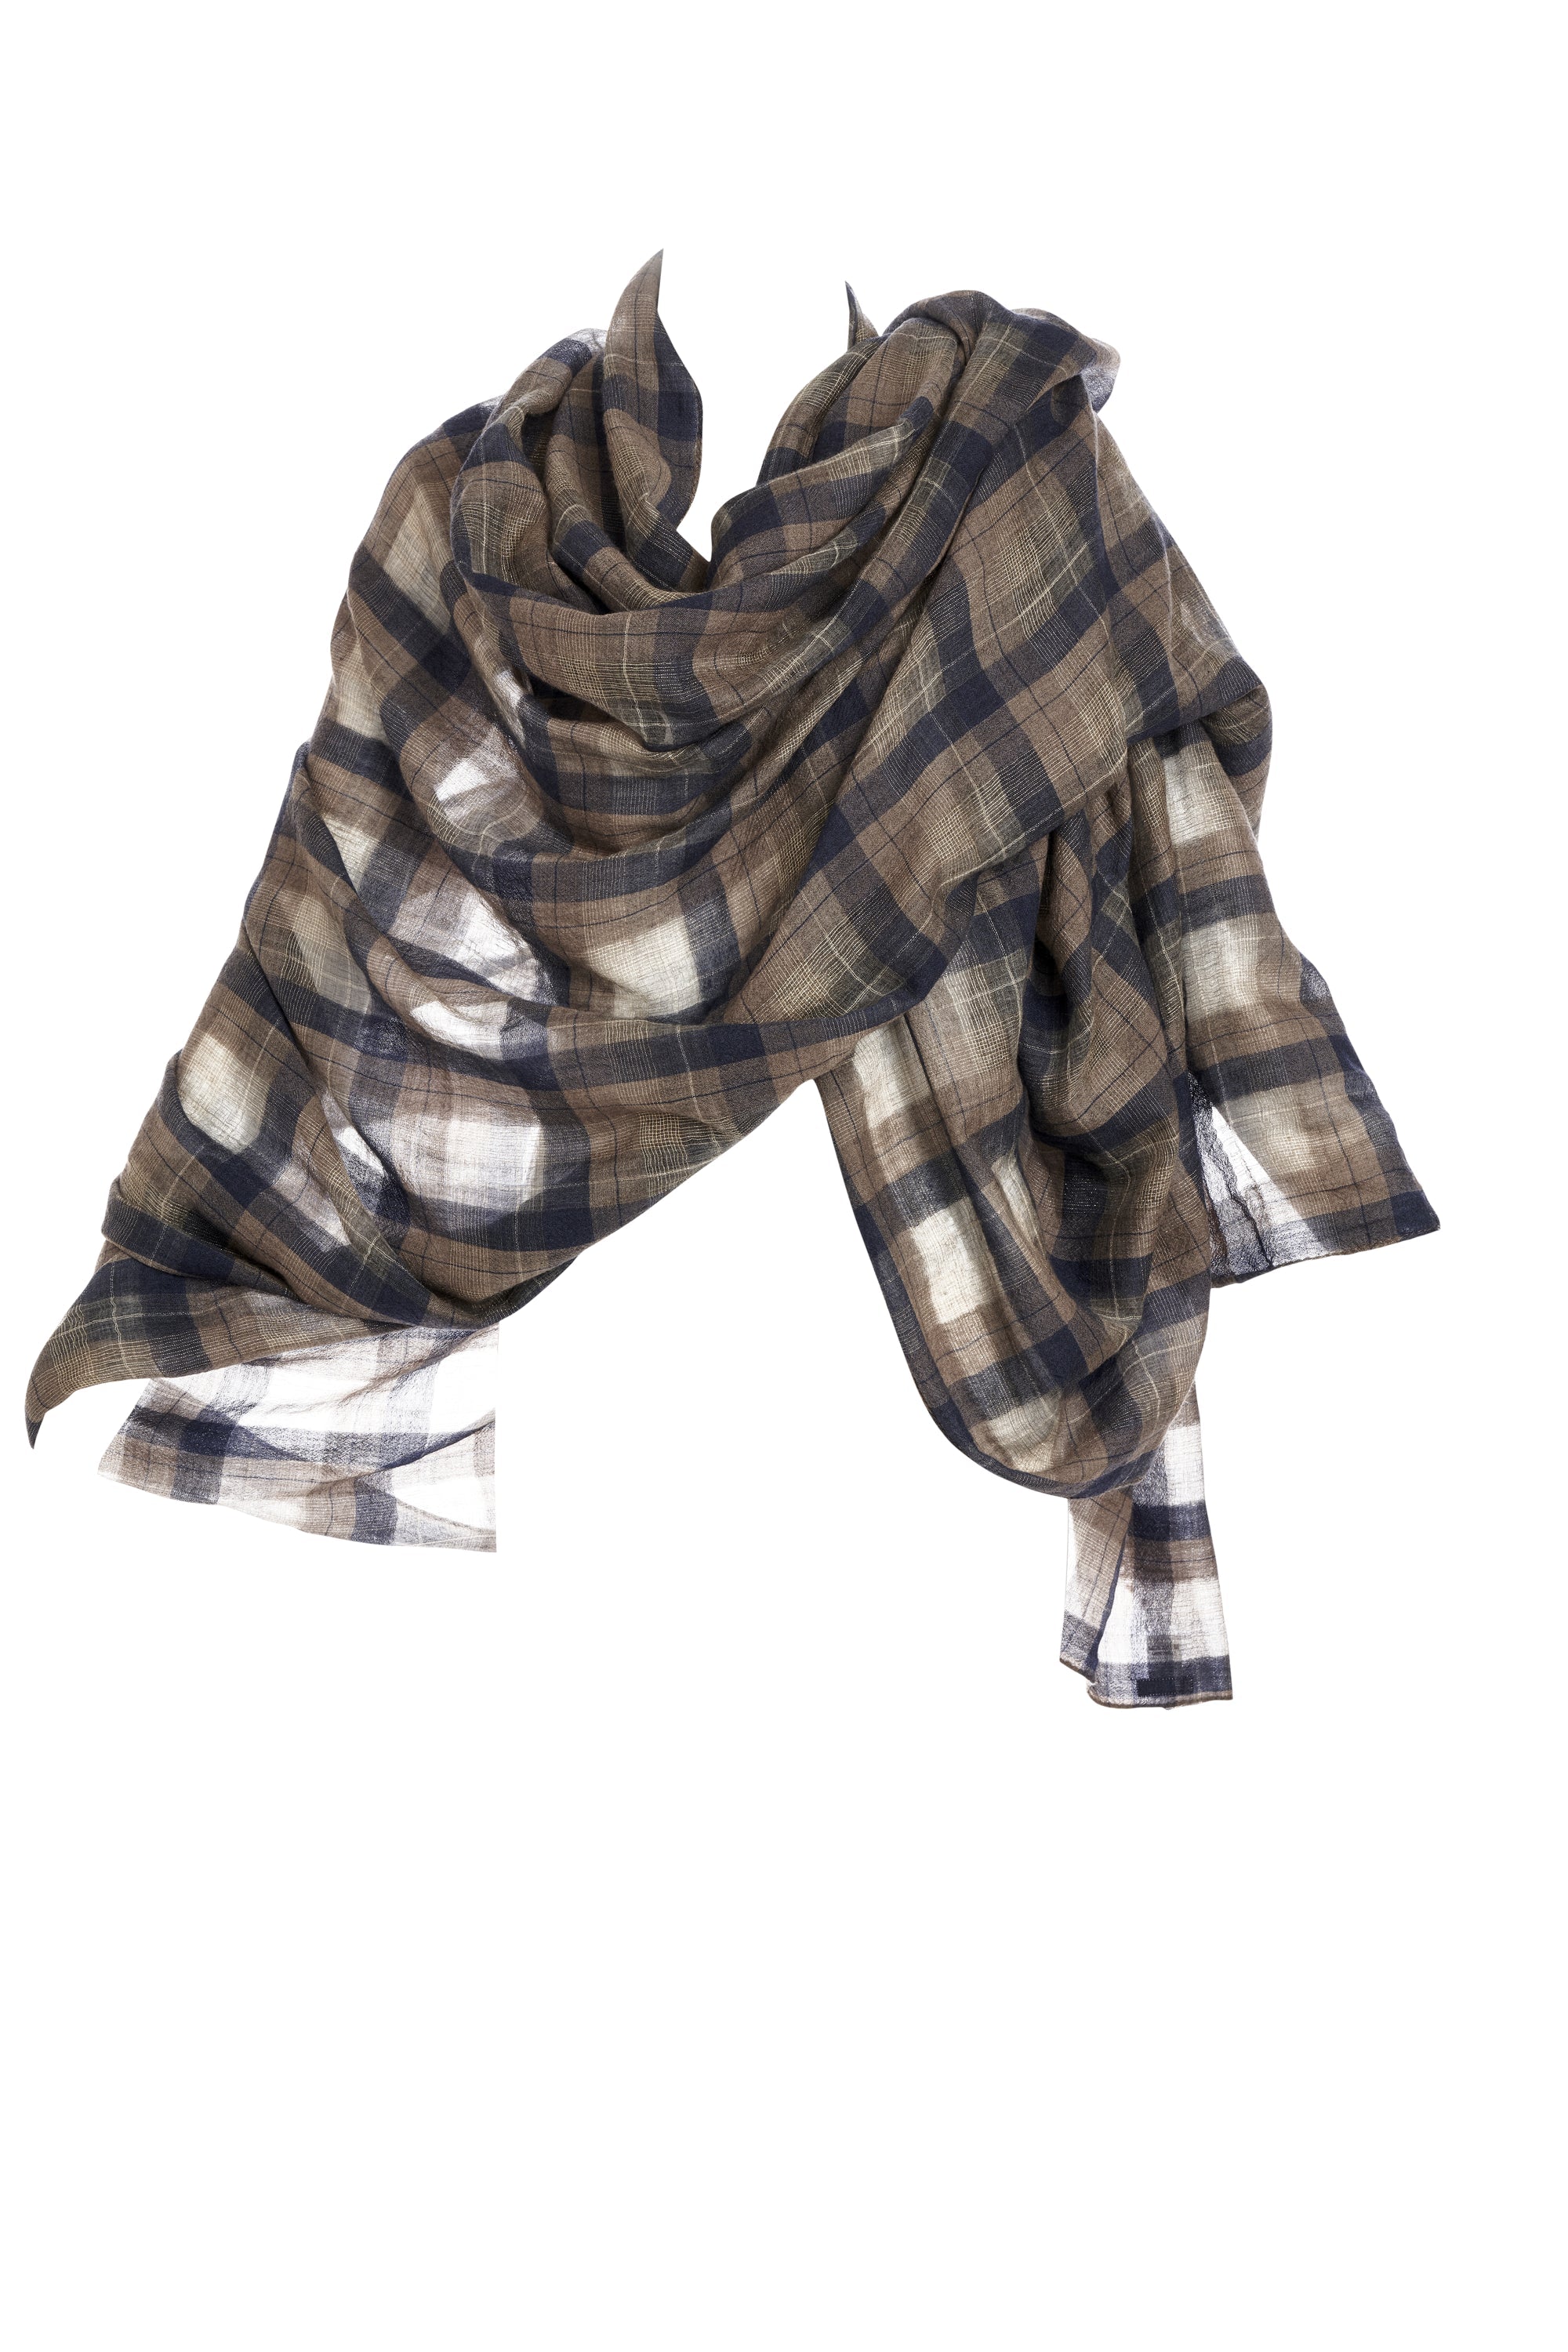 Brunello Cuccinelli Plaid Navy and Beige Cashmere Scarf - Foxy Couture Carmel